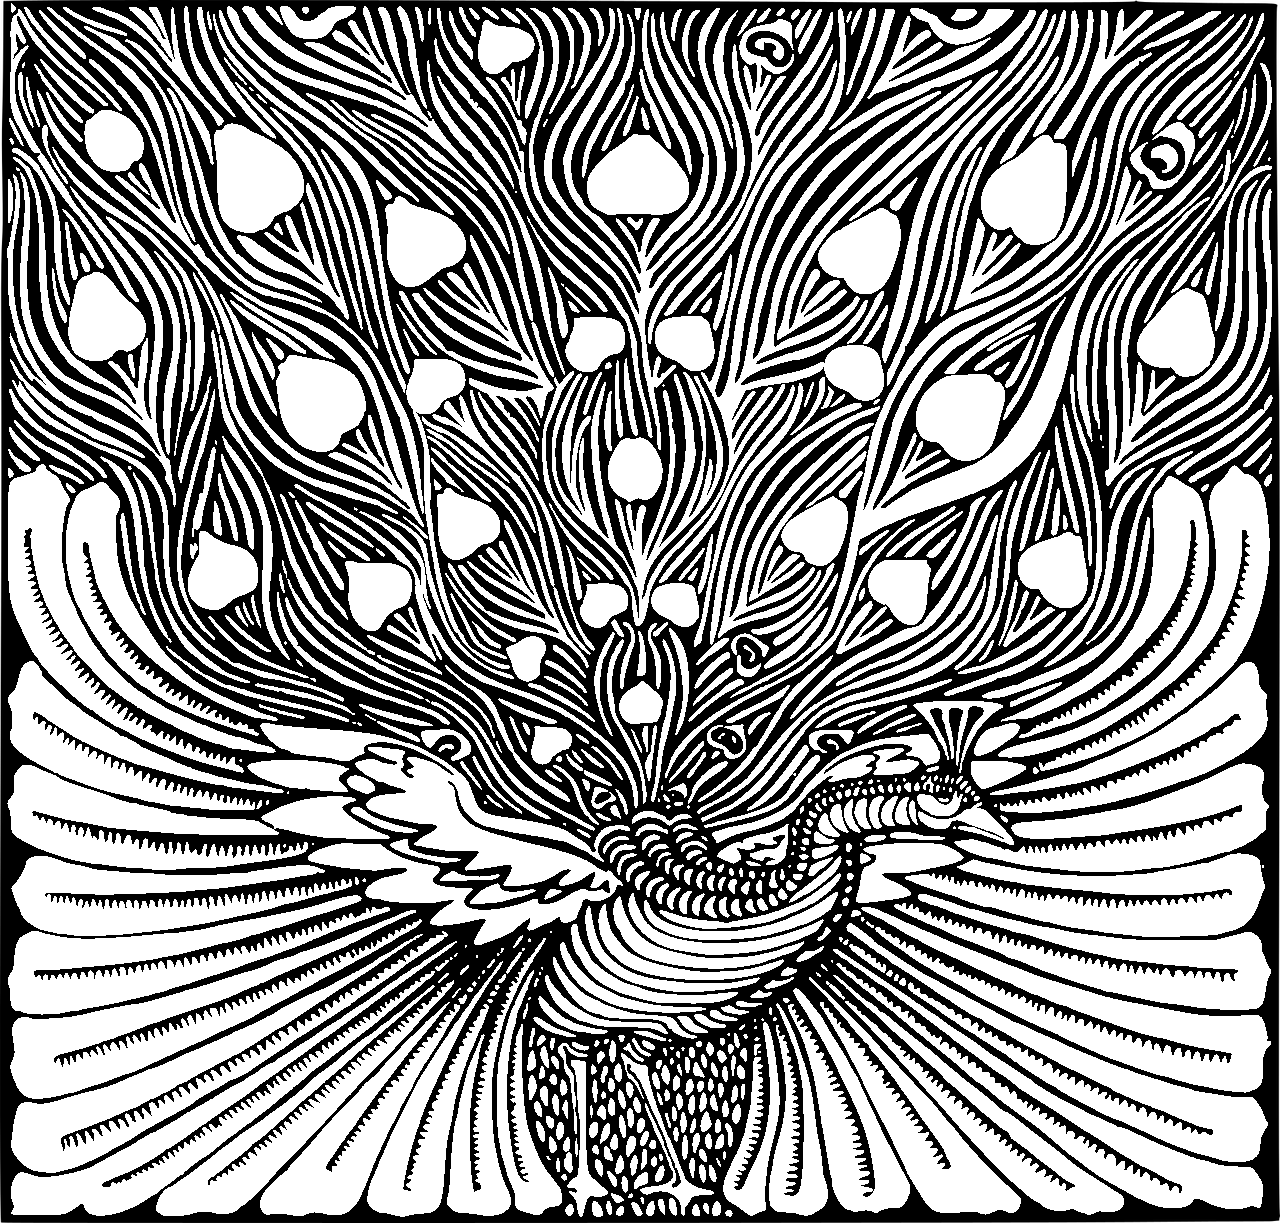 Coloring page of a peacock